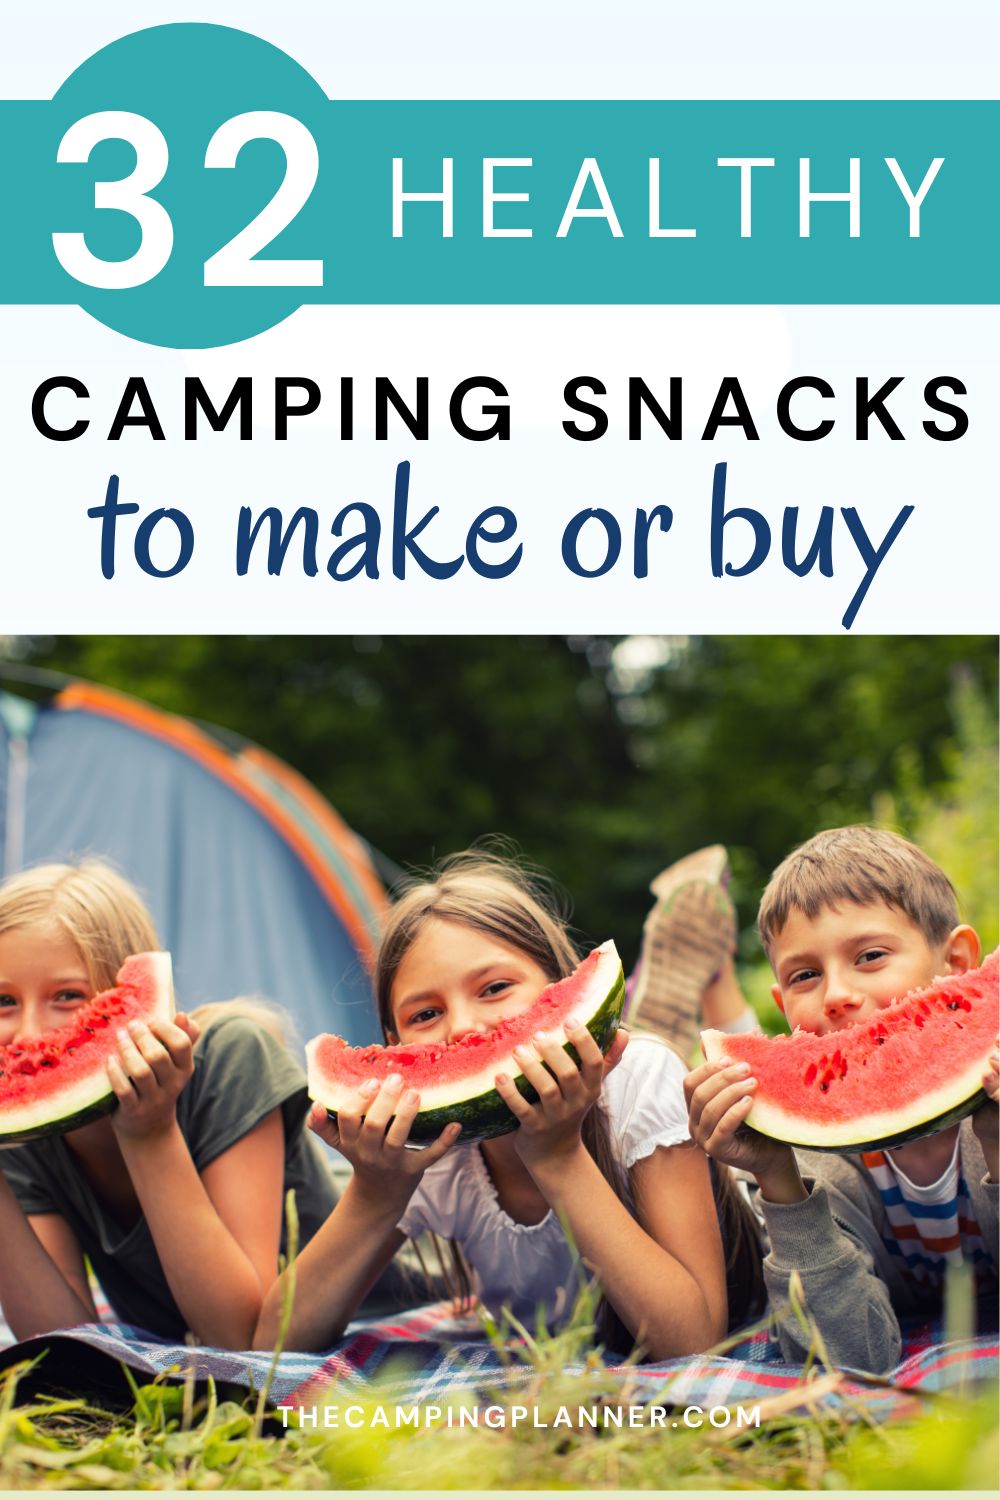 32 healthy camping snacks to make or buy for your camping trip.